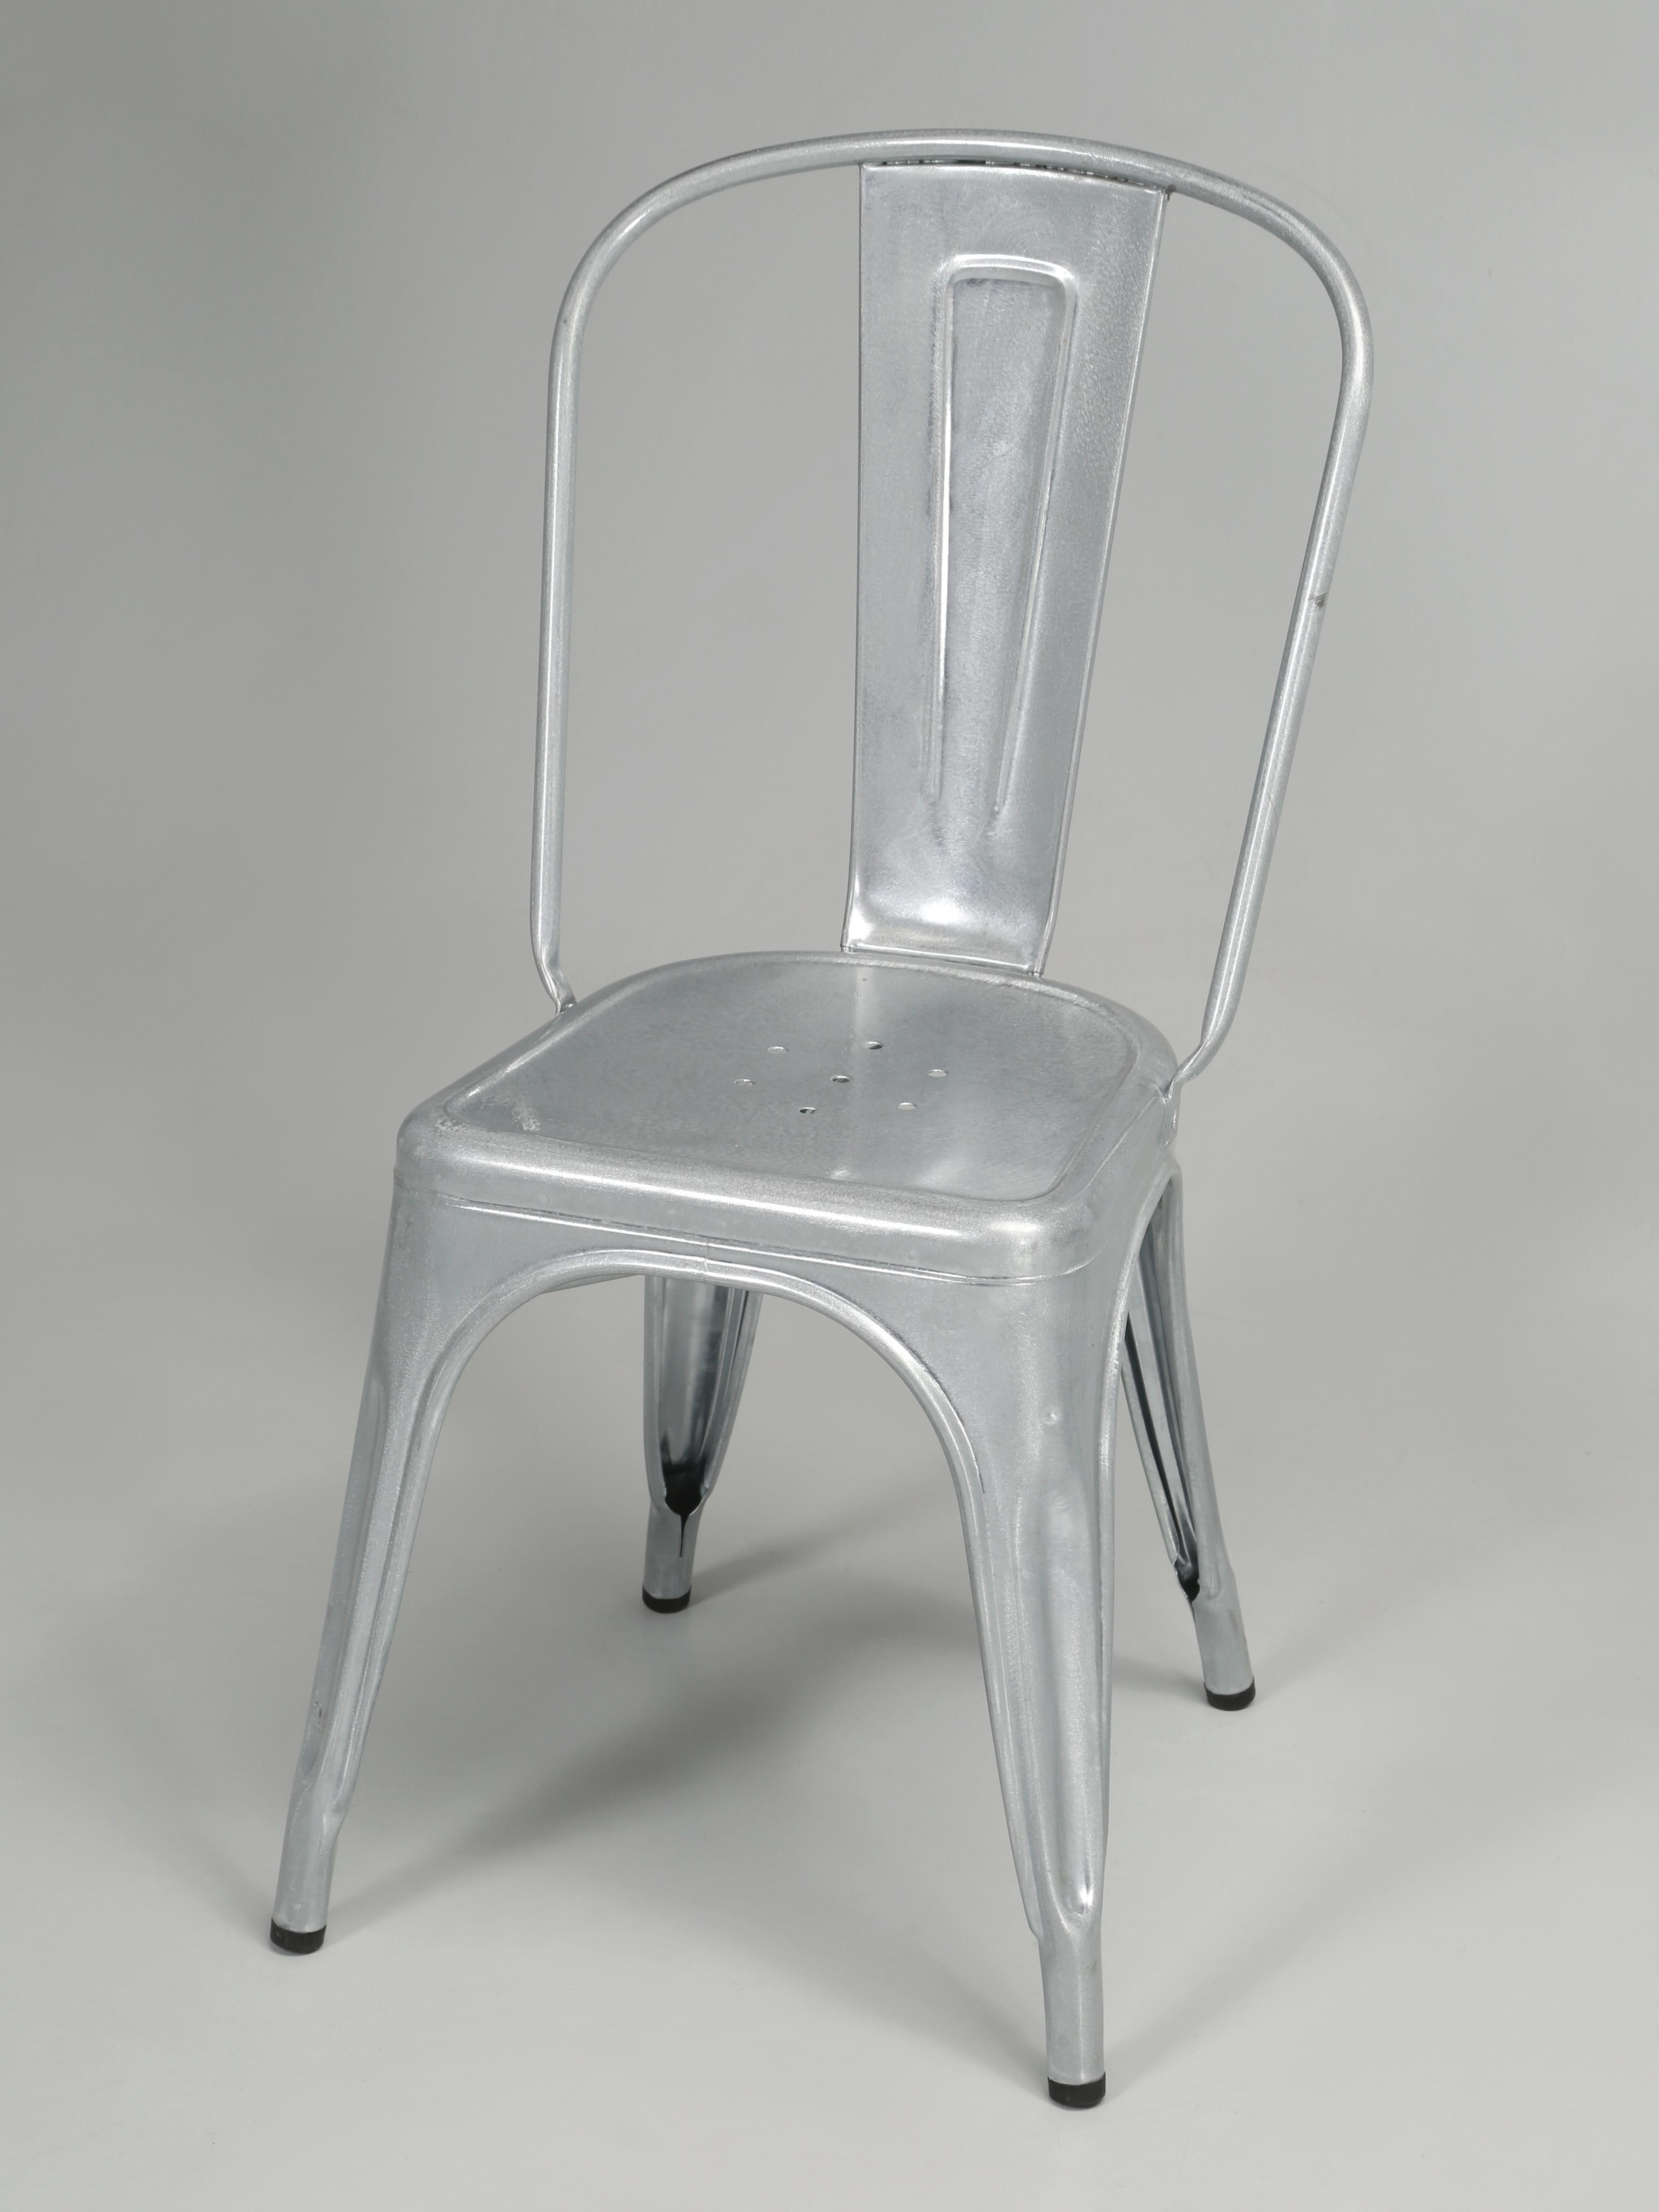 Industrial Genuine French Tolix Steel Stacking Chairs Set 4 Galvanized with a Clear-Coat